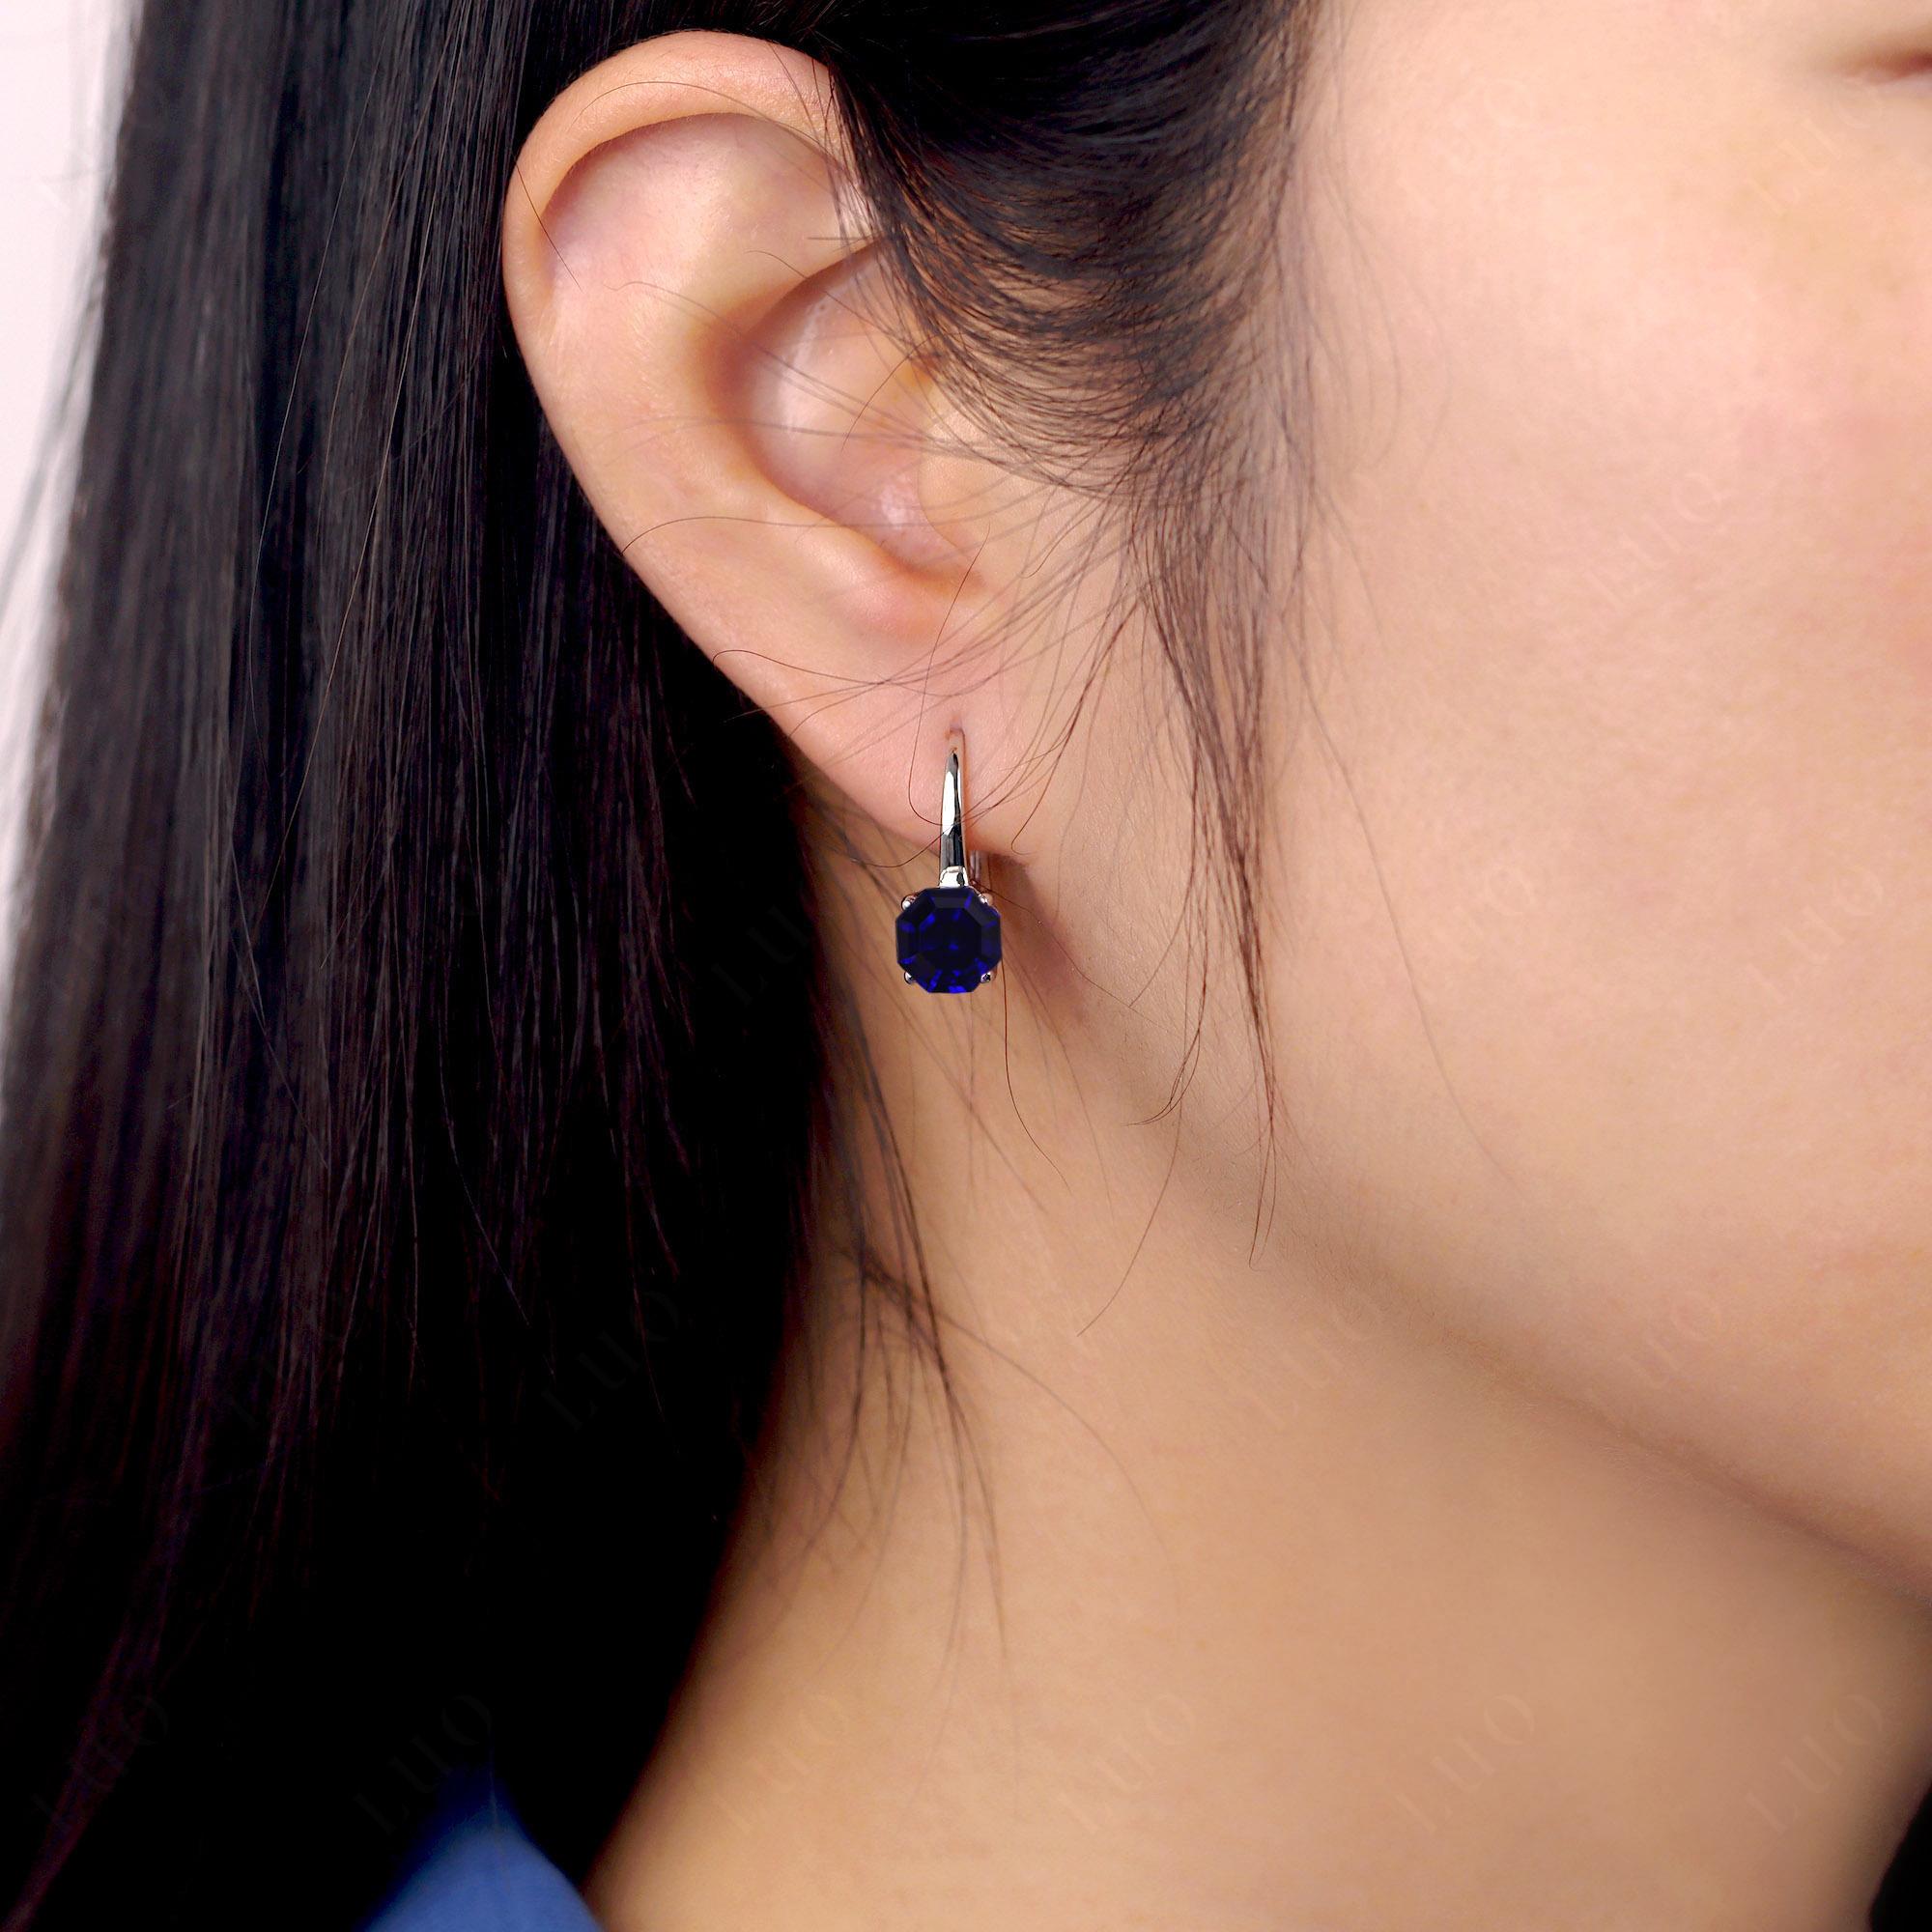 Octagon Cut Lab Created Sapphire Leverback Earrings - LUO Jewelry